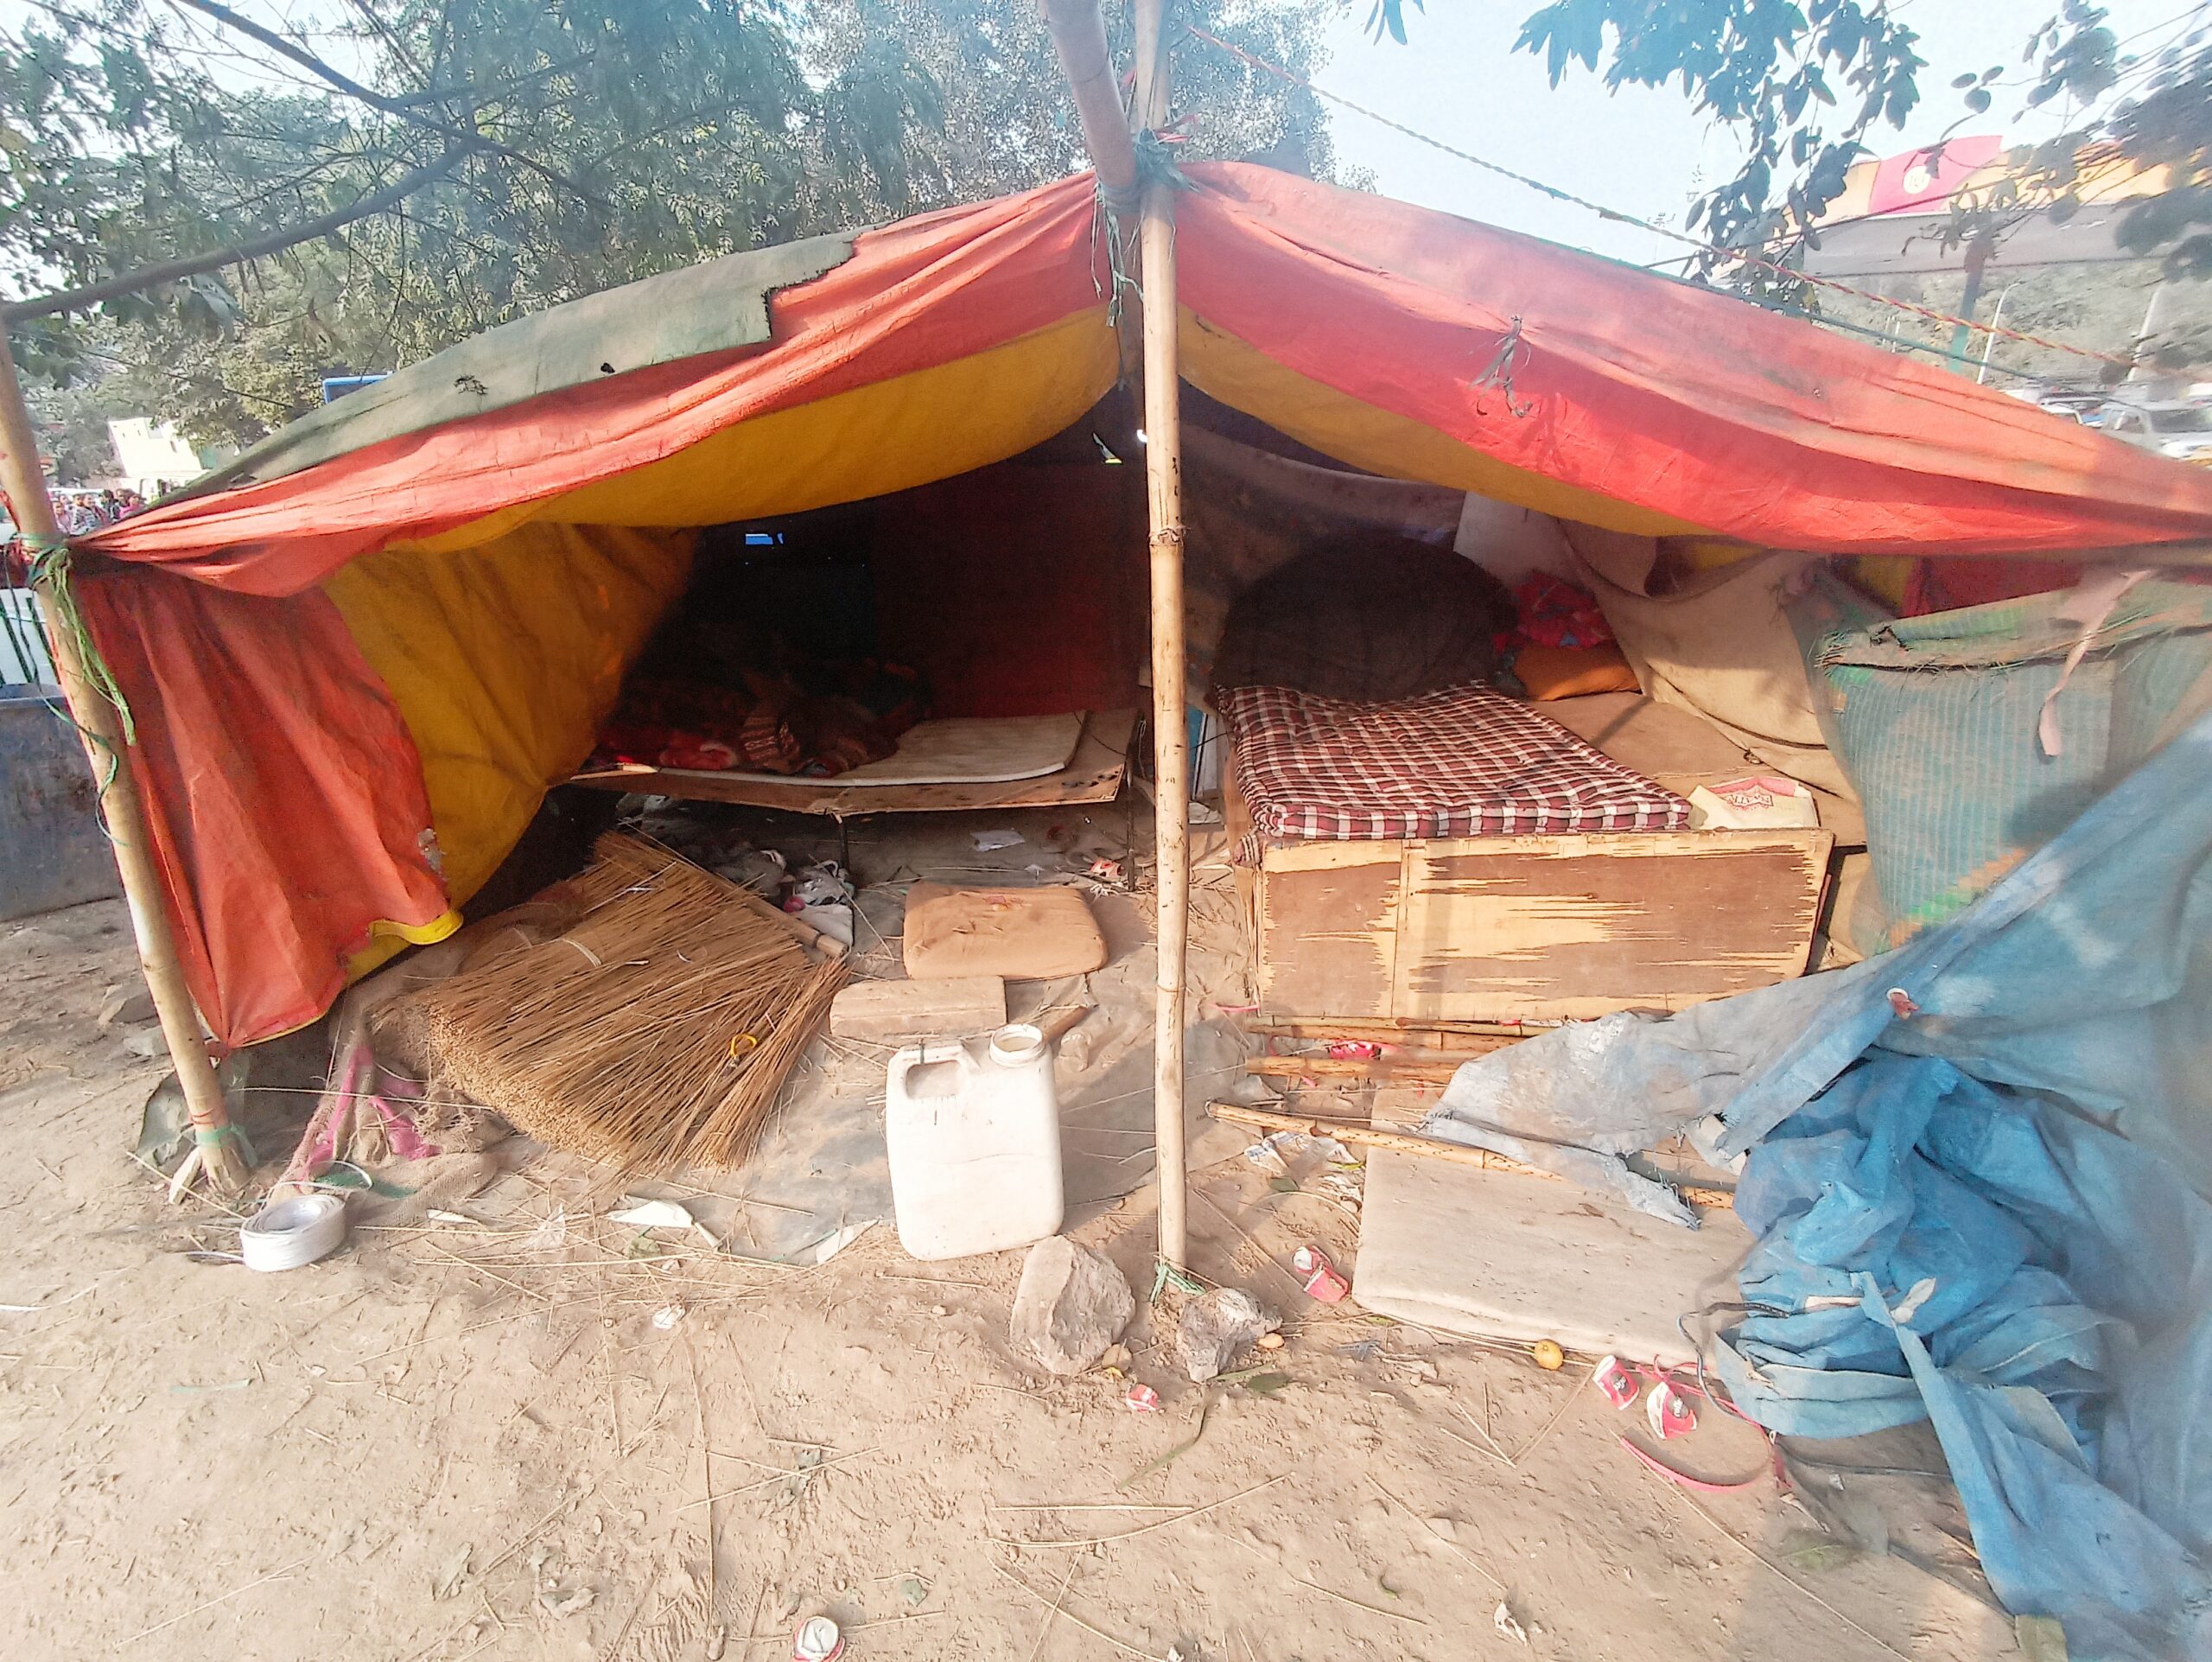 Govt brings winter action plan for homeless people, 110 tents set up across Delhi